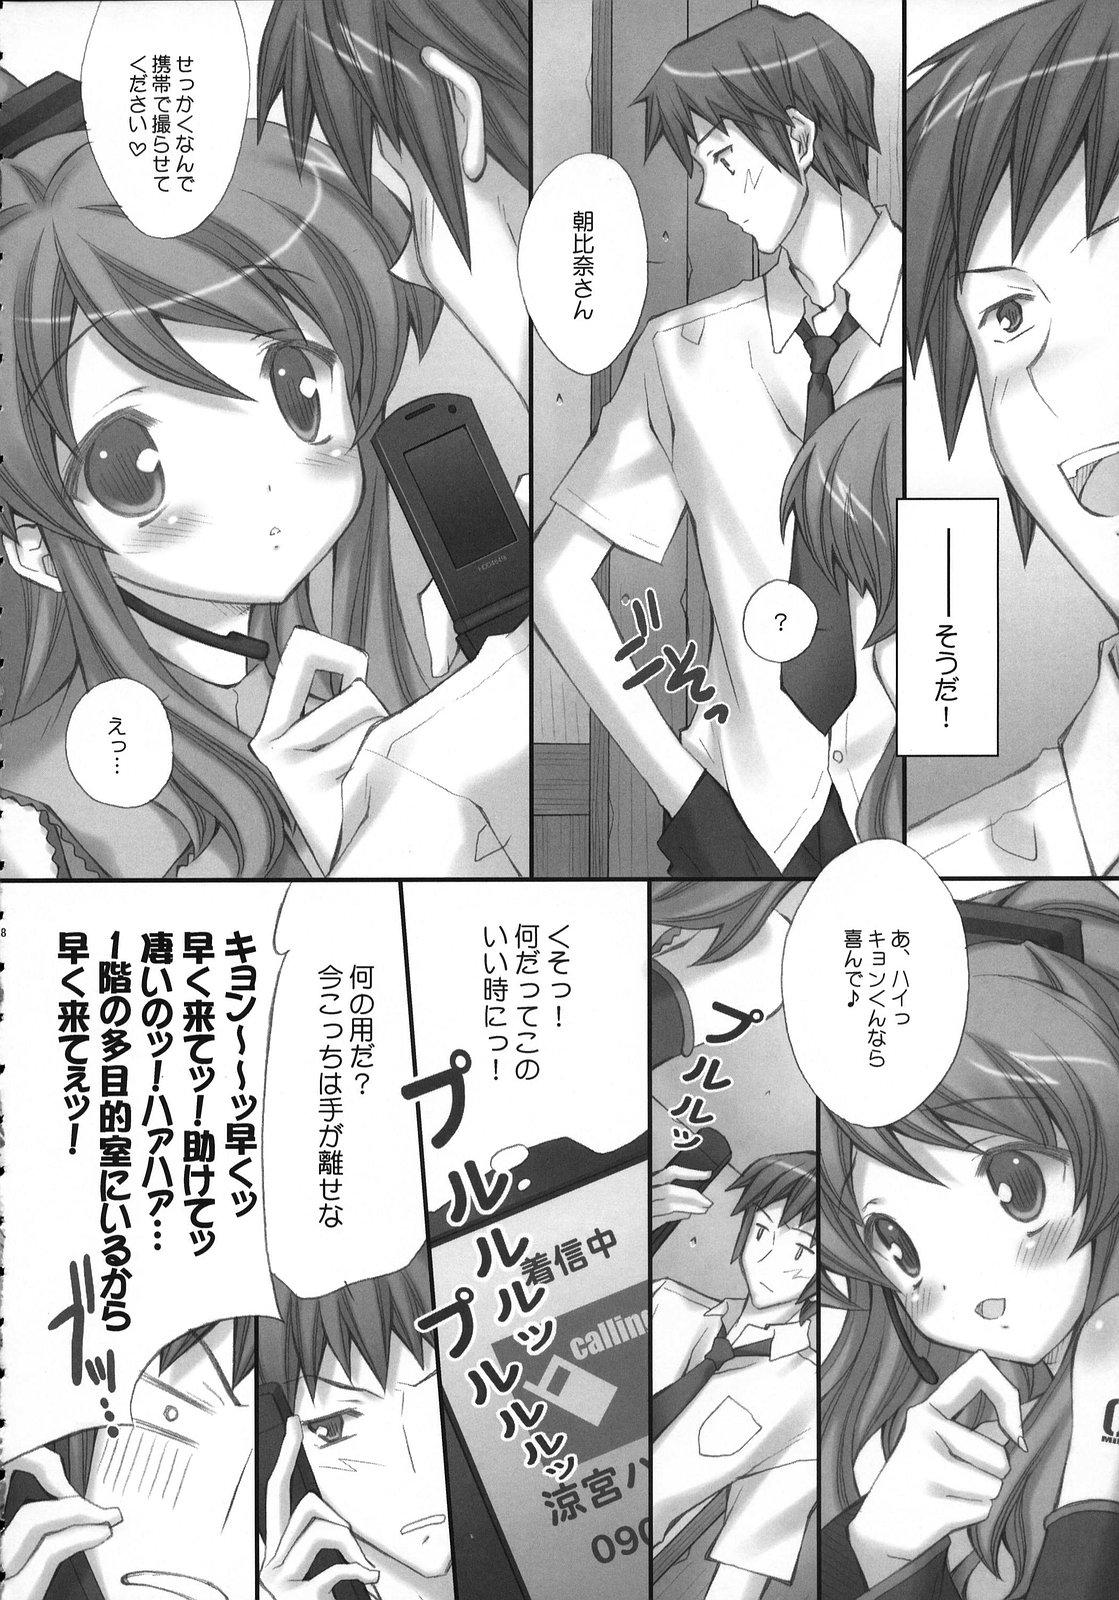 Cock Suck ponytail syndrome - The melancholy of haruhi suzumiya Boy Fuck Girl - Page 7